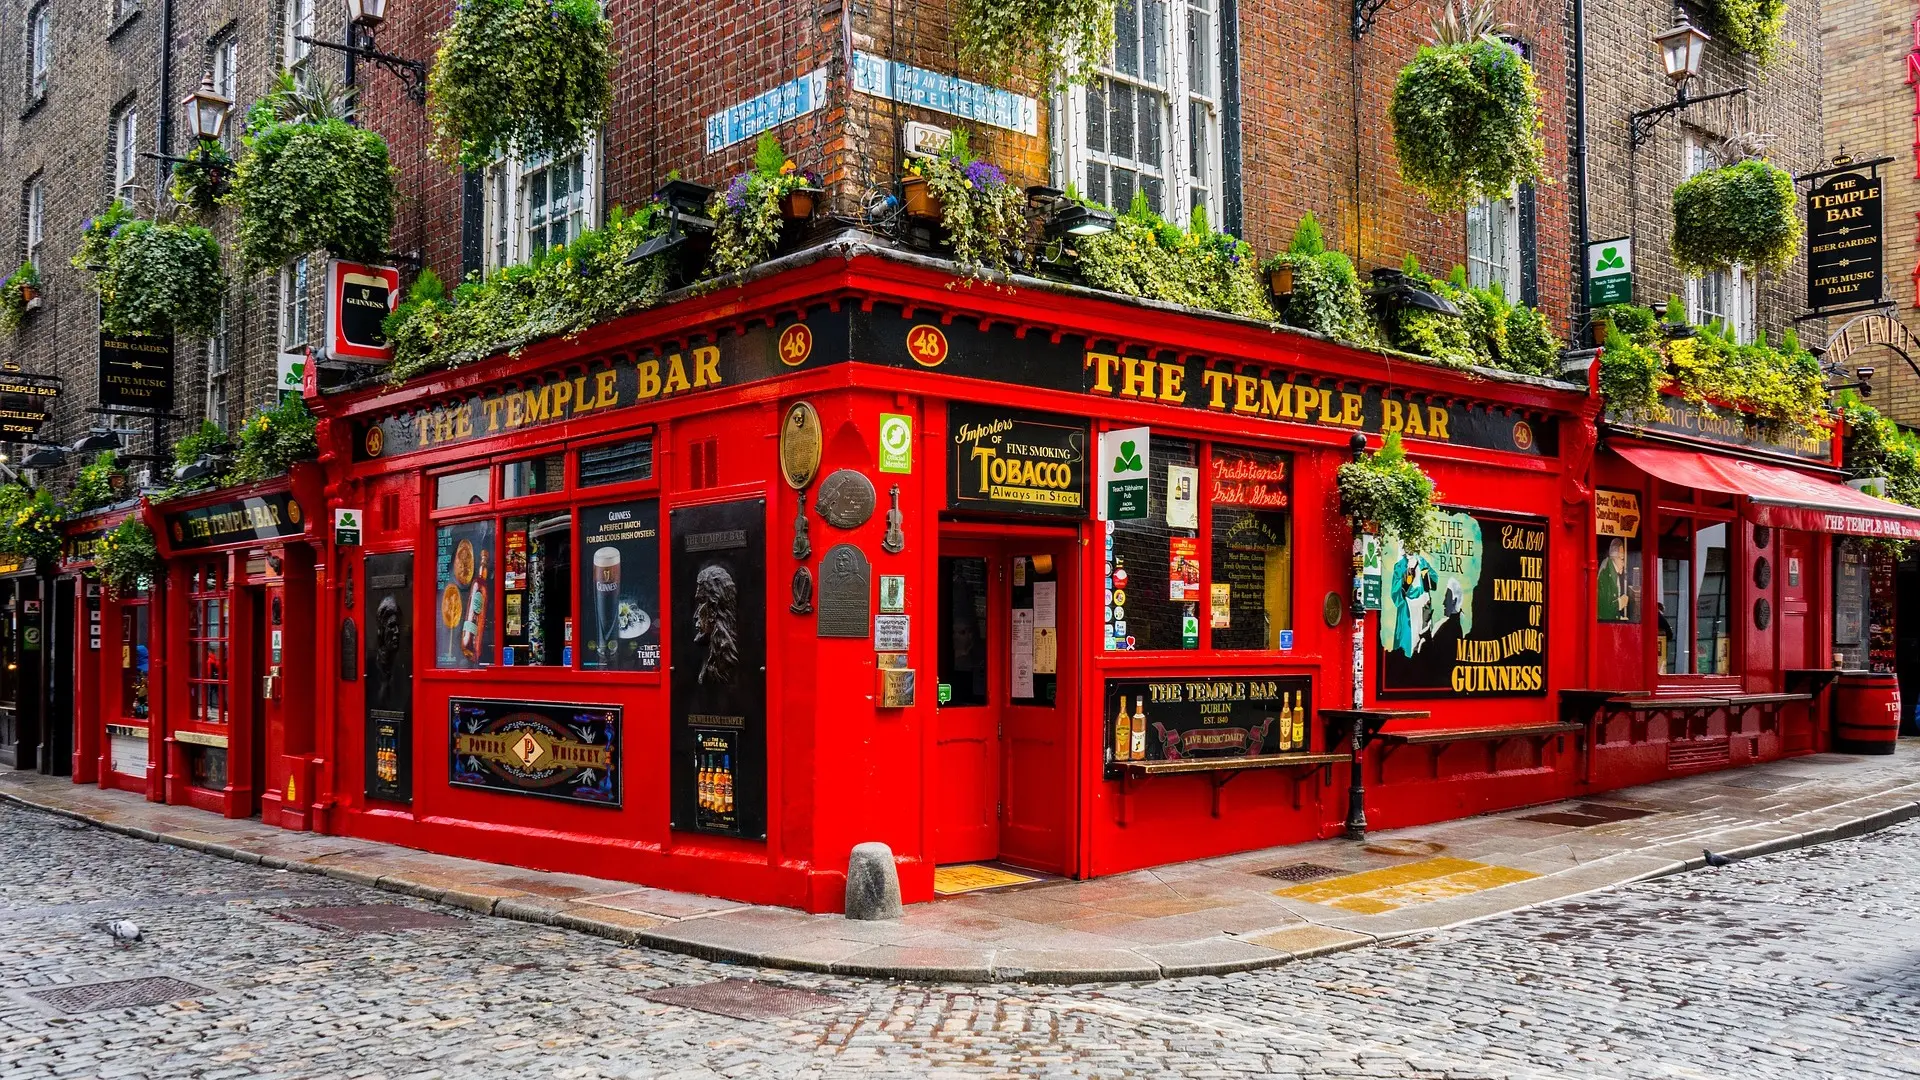 THE TEMPLE BAR with a brigth red design, posters and small windows sorounded by brick design in Dublin.